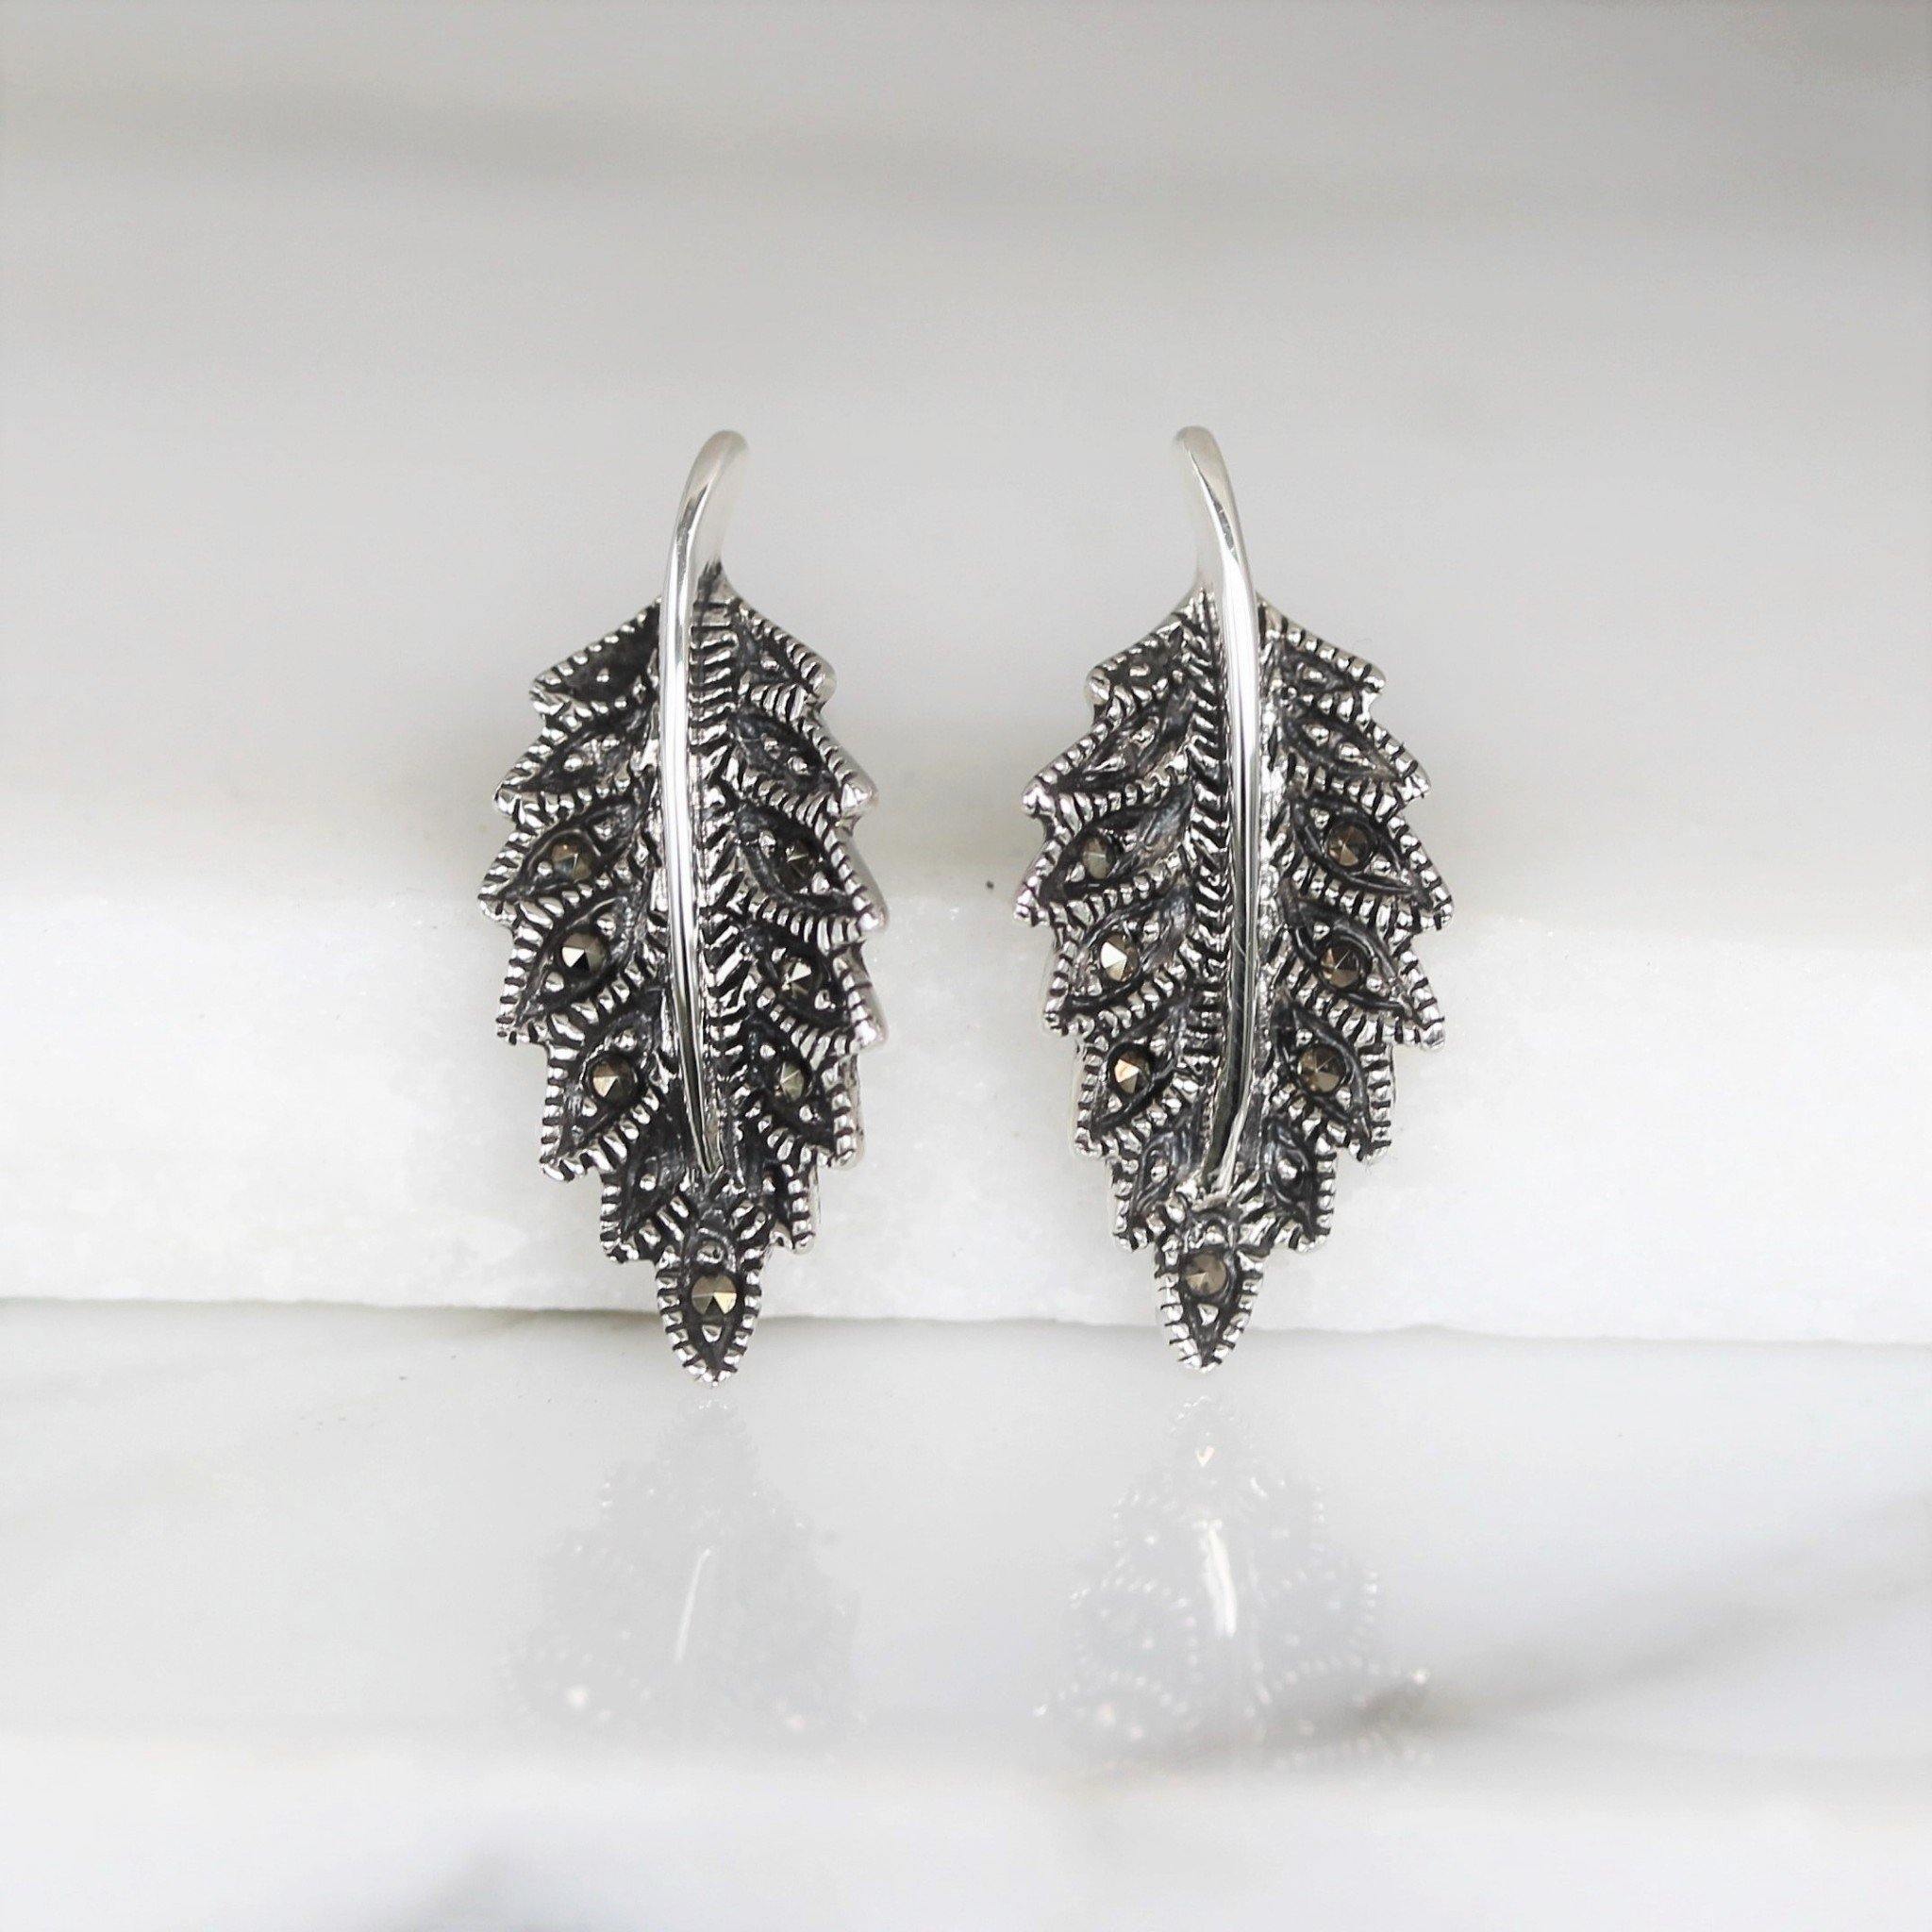 Sterling Silver Vintage Style Big Marcasite Feather Stud Earrings - STERLING SILVER DESIGNS